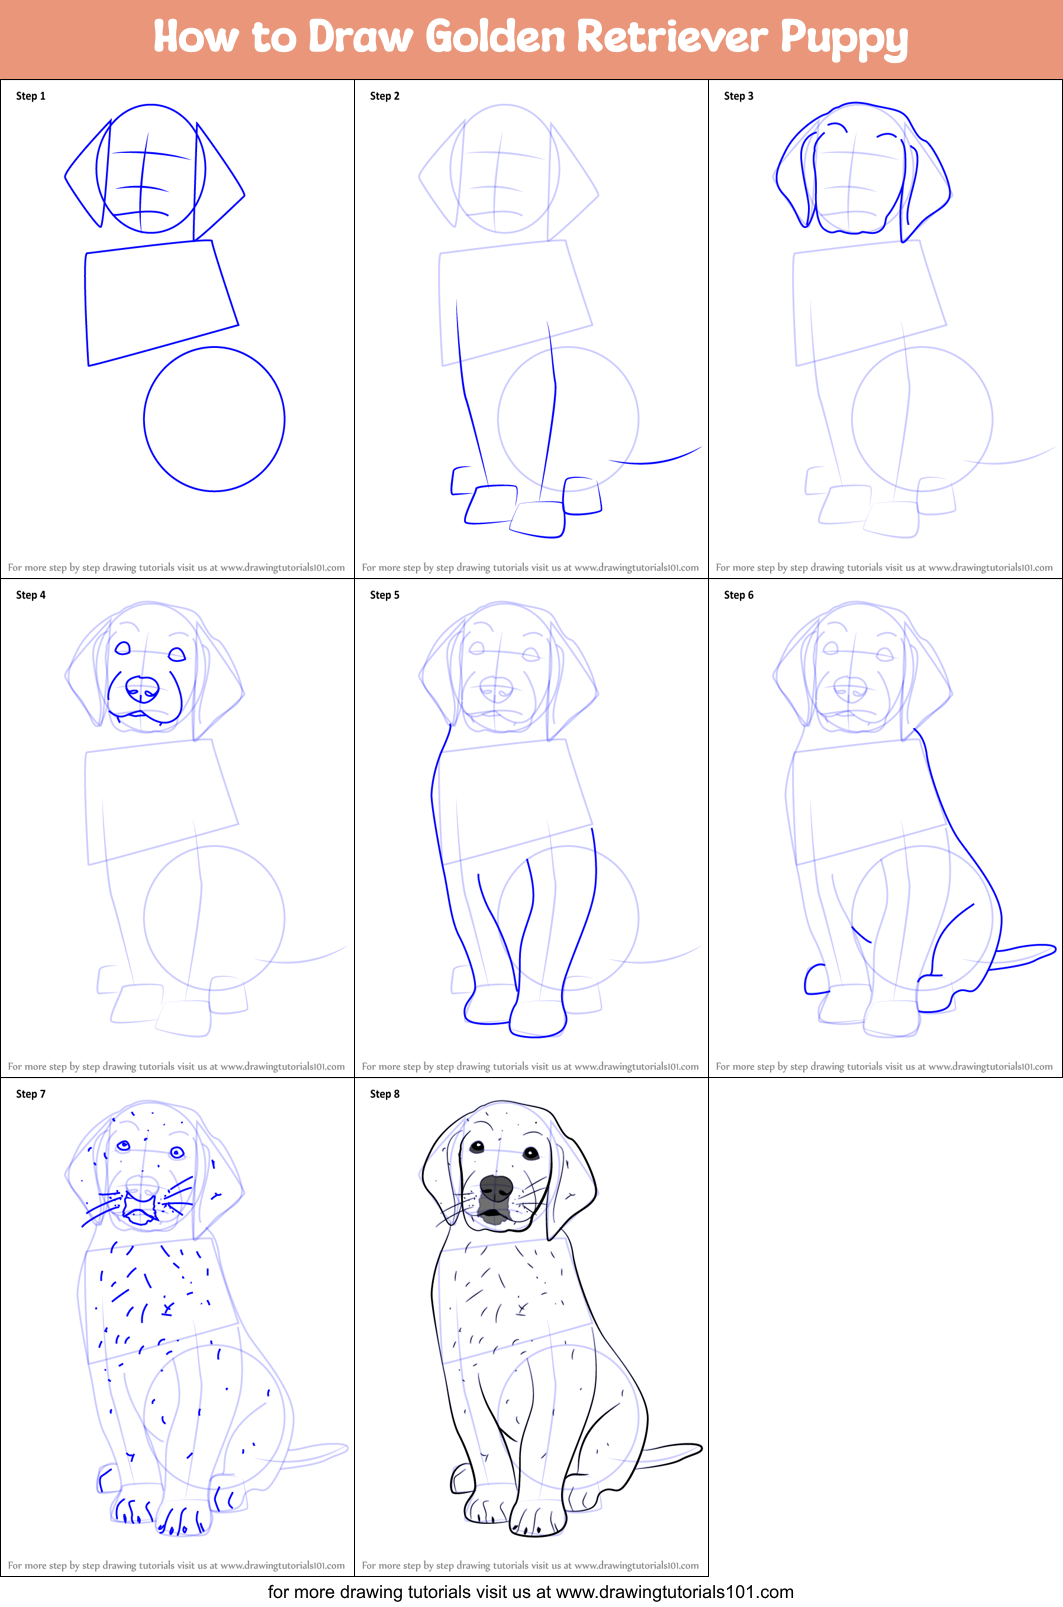 How to Draw Golden Retriever Puppy printable step by step